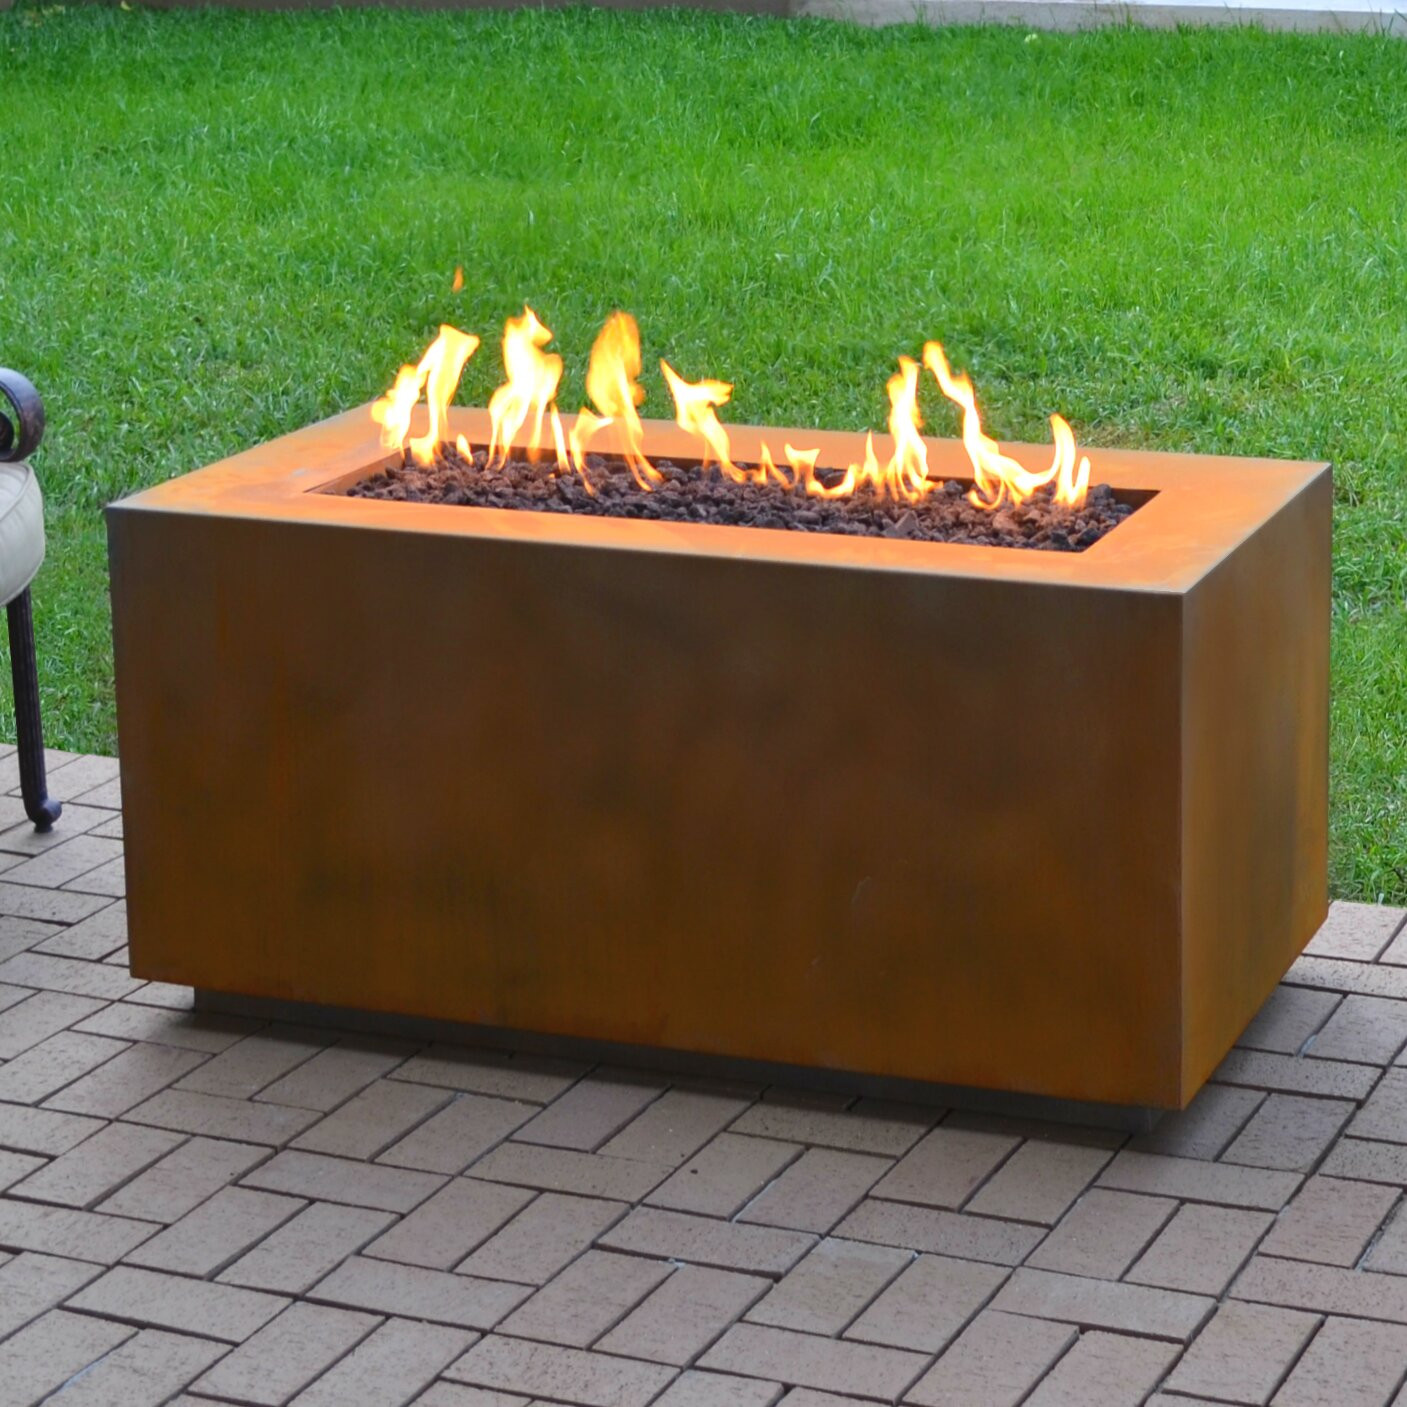 Patio Table With Fire Pit
 The Outdoor Plus Corten Steel Propane Fire Pit Table